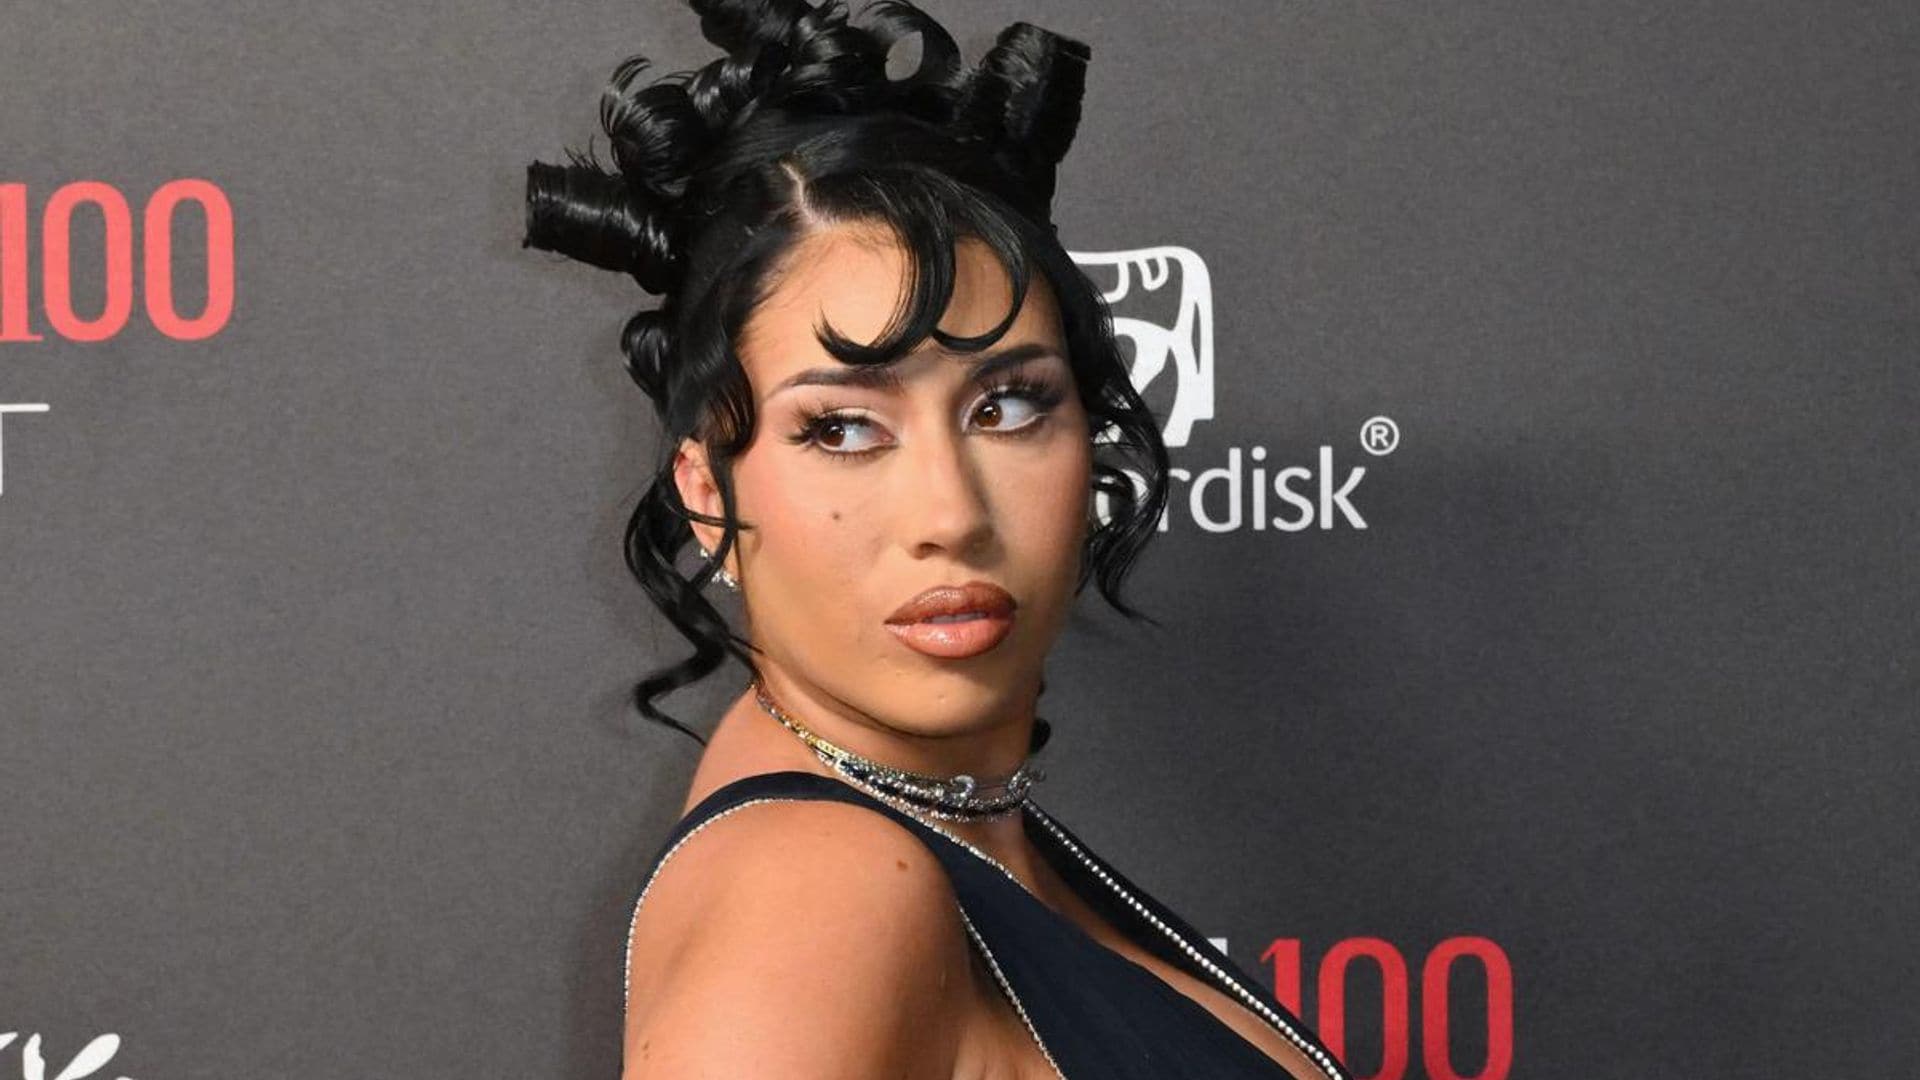 Kali Uchis gives birth to her first child with rapper Don Toliver: ‘Our beautiful healthy baby boy’